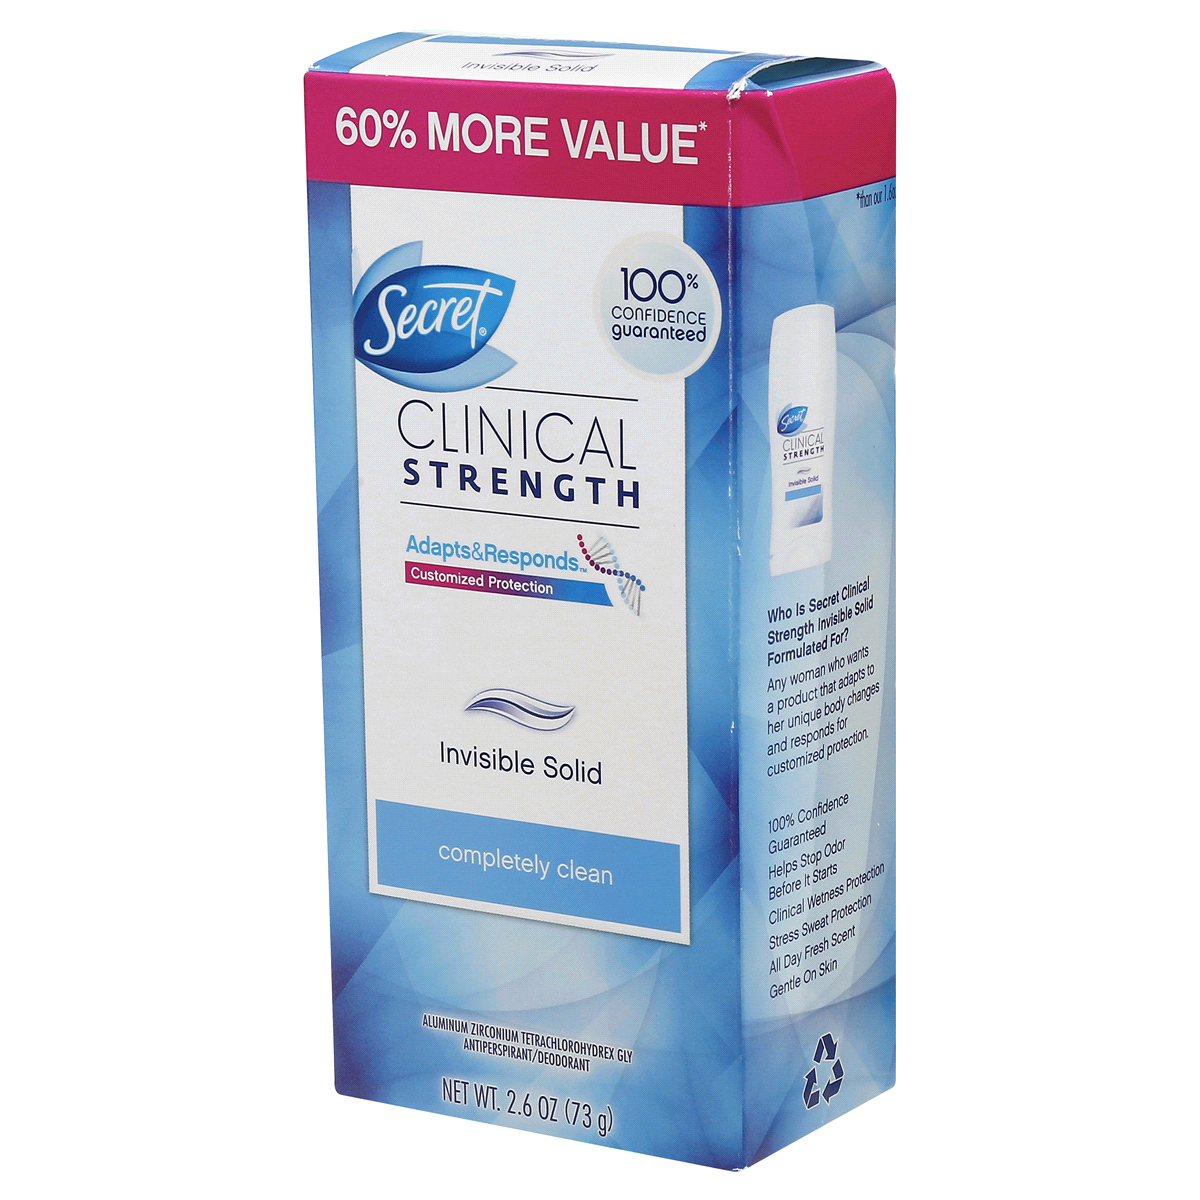 slide 22 of 59, Secret Clinical Strength Invisible Solid Antiperspirant and Deodorant for Women, Completely Clean, 2.6 oz, 2.6 oz